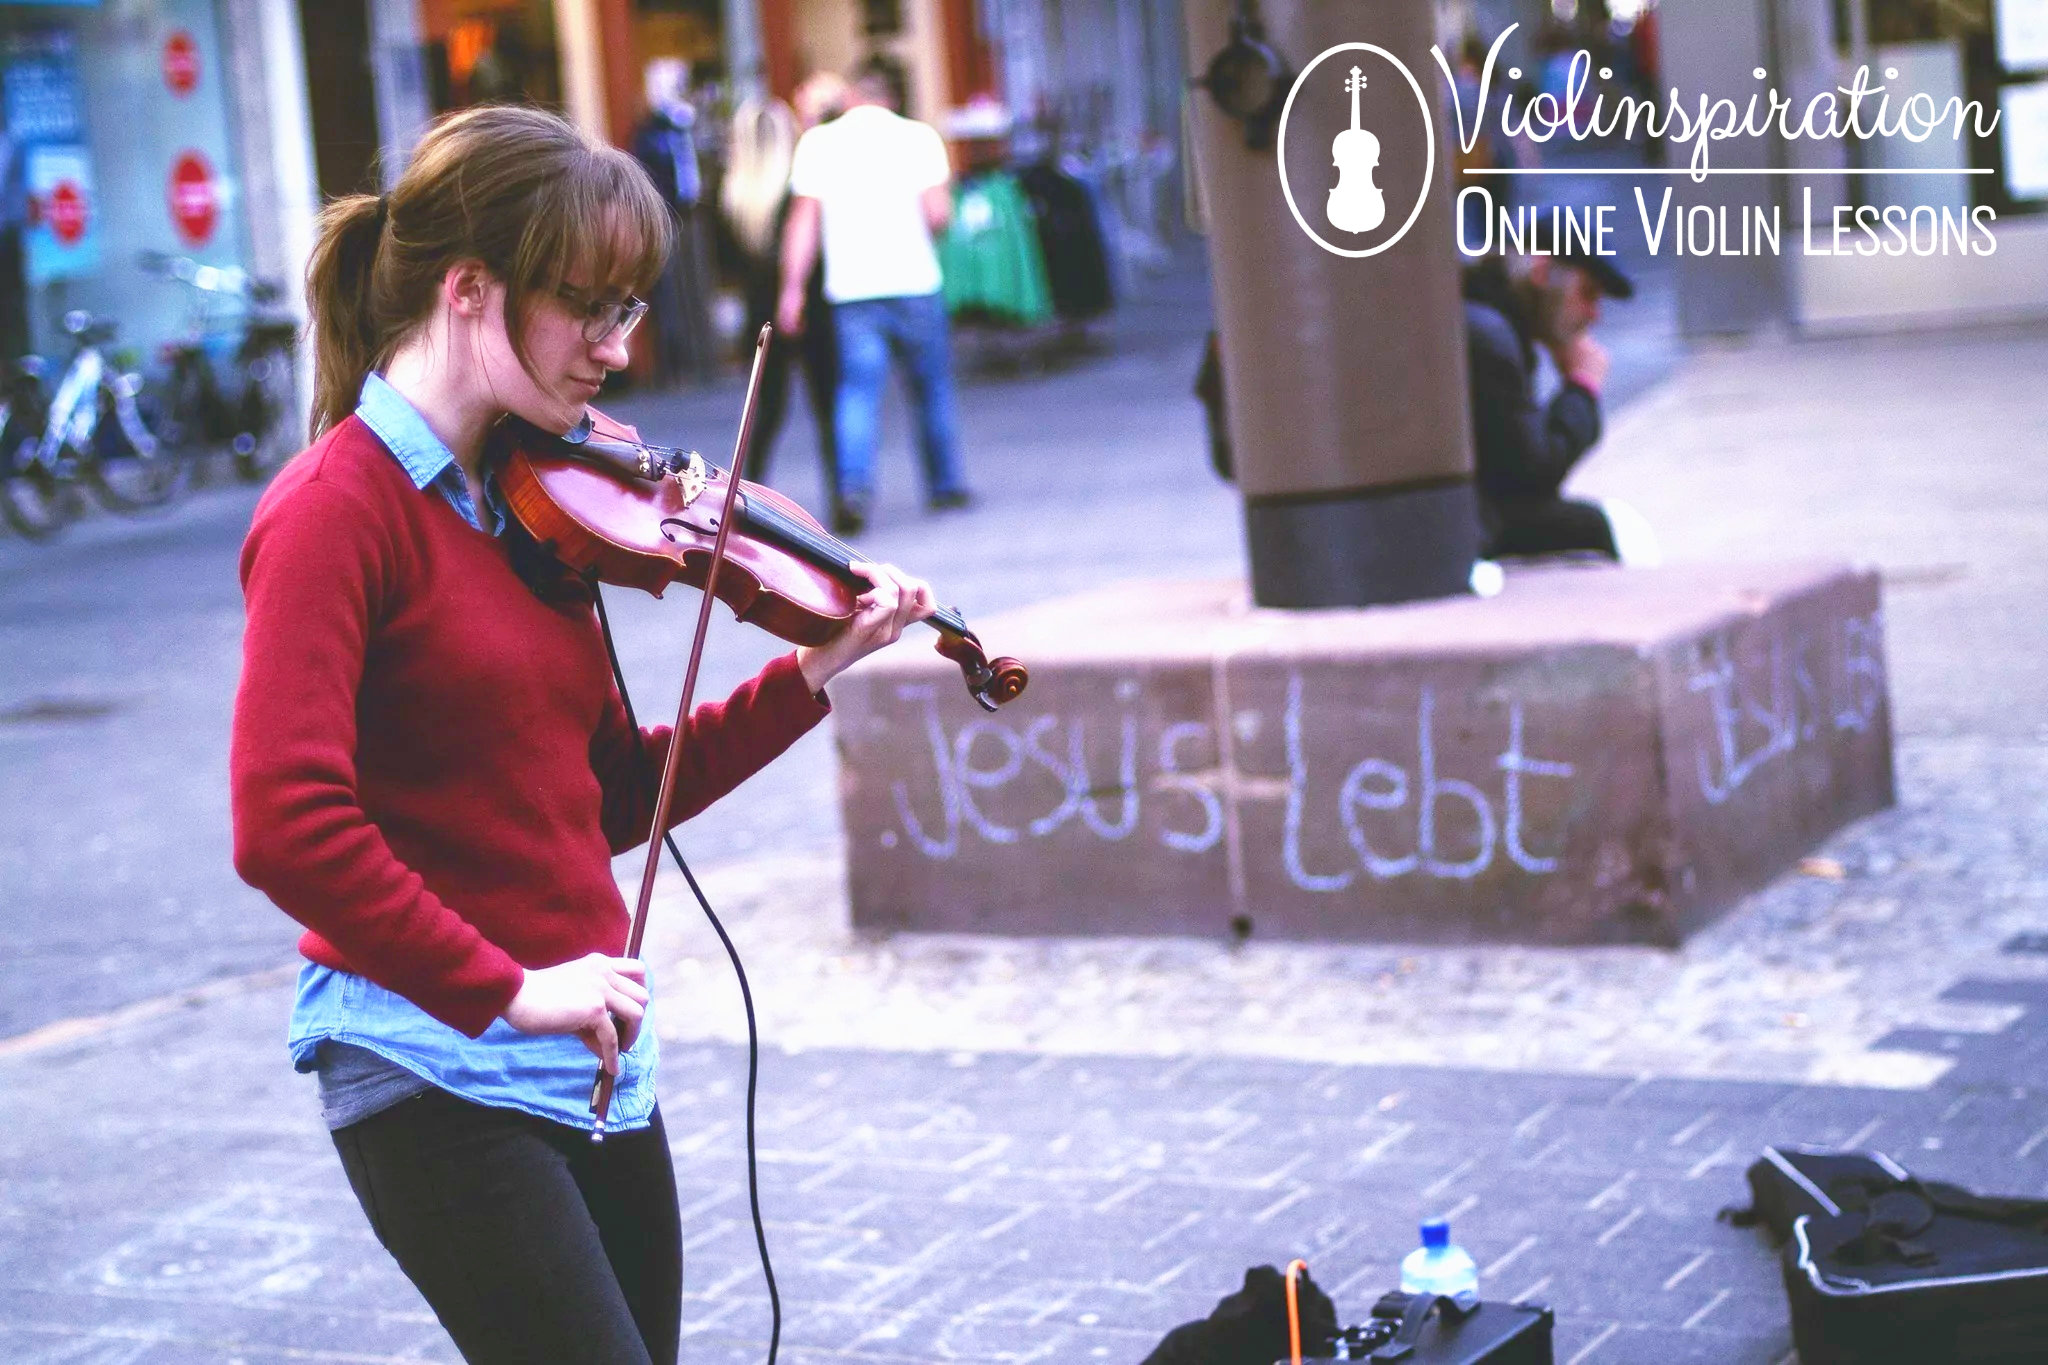 violin pickup - Julia as a street musician with violin connected to an amplifier